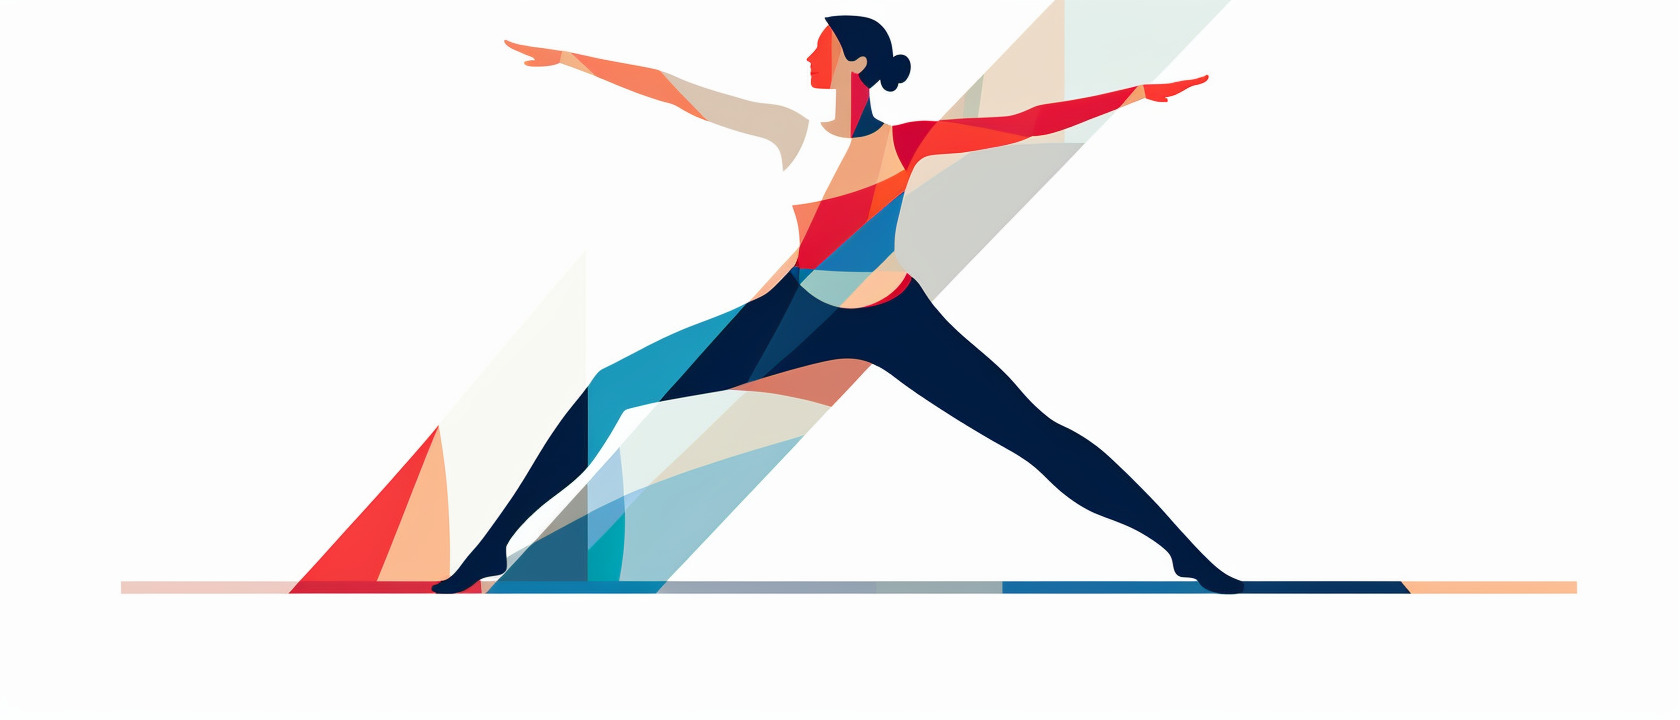 artistic illustration of a woman with high-self esteem doing the yoga warrior pose